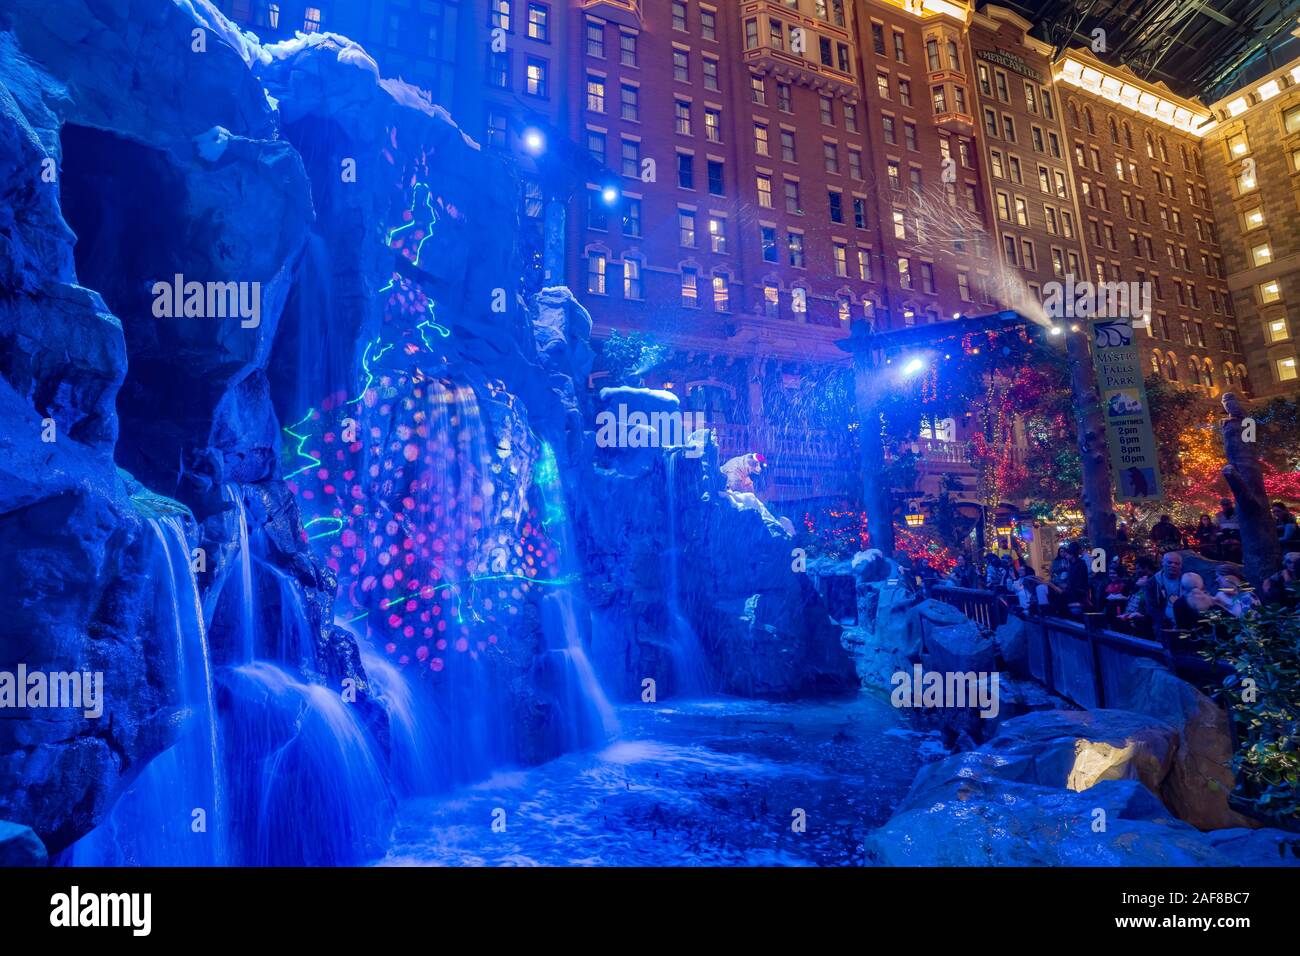 Las Vegas, DEC 12: Beautiful Christmas lights and shows of the Mystic Falls Park in Sam's Town on DEC 12, 2019 at Las Vegas, Nevada Stock Photo